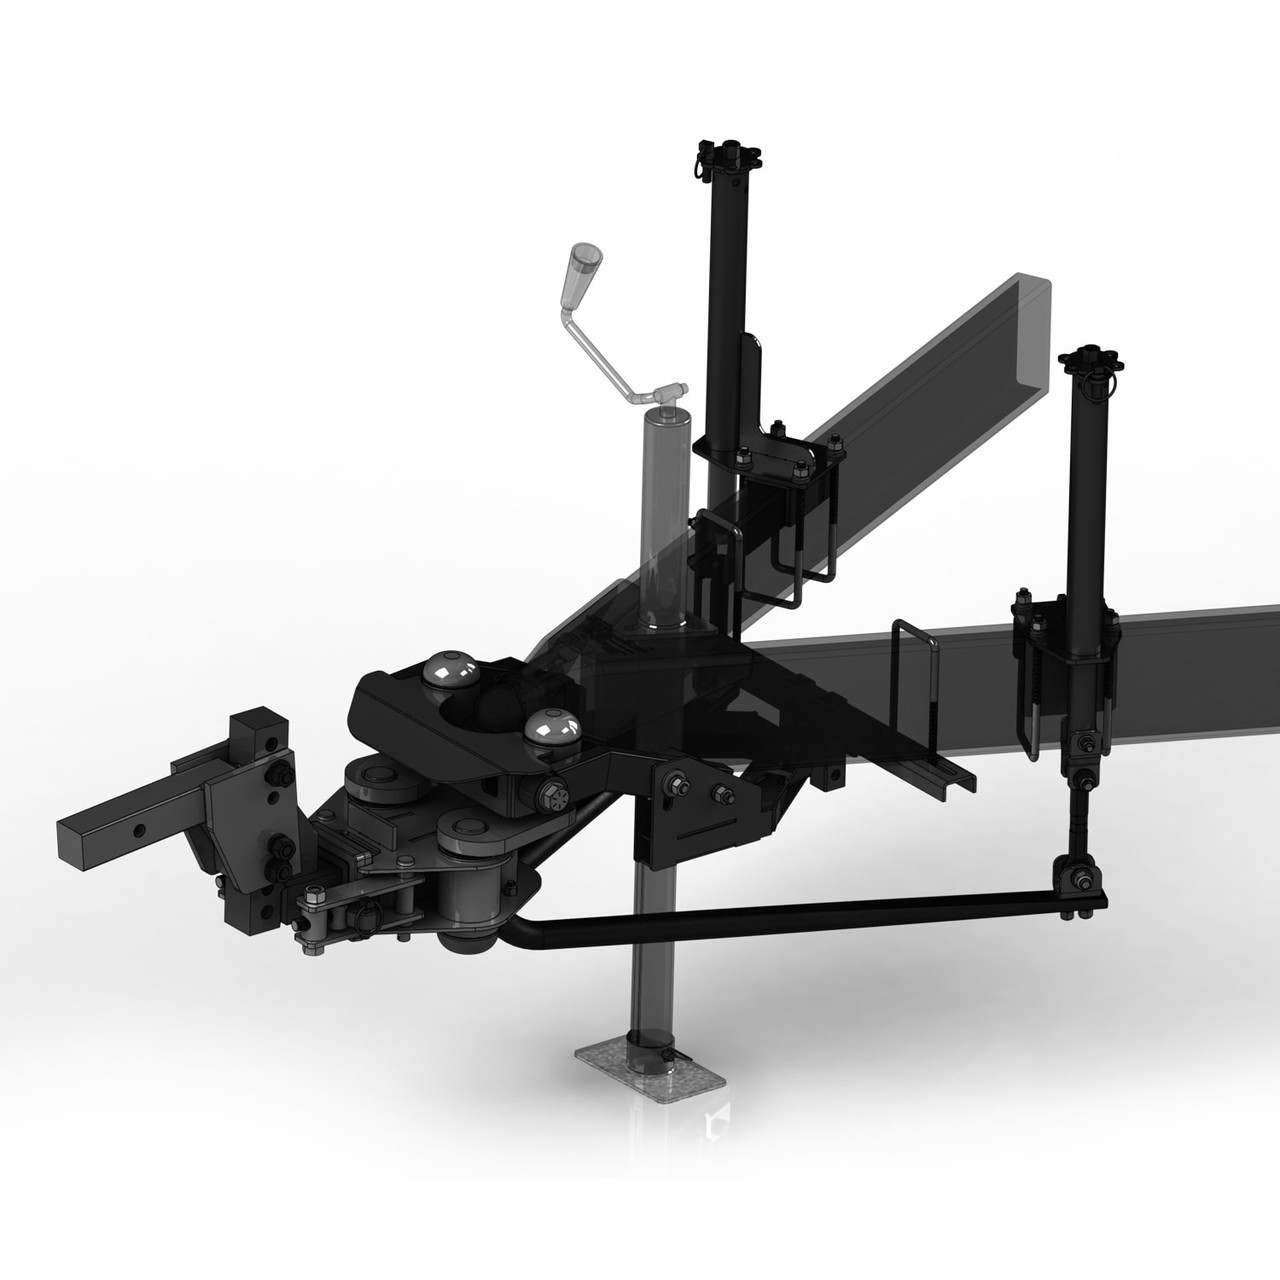 The ProPride 3P Trailer Sway Control Hitch